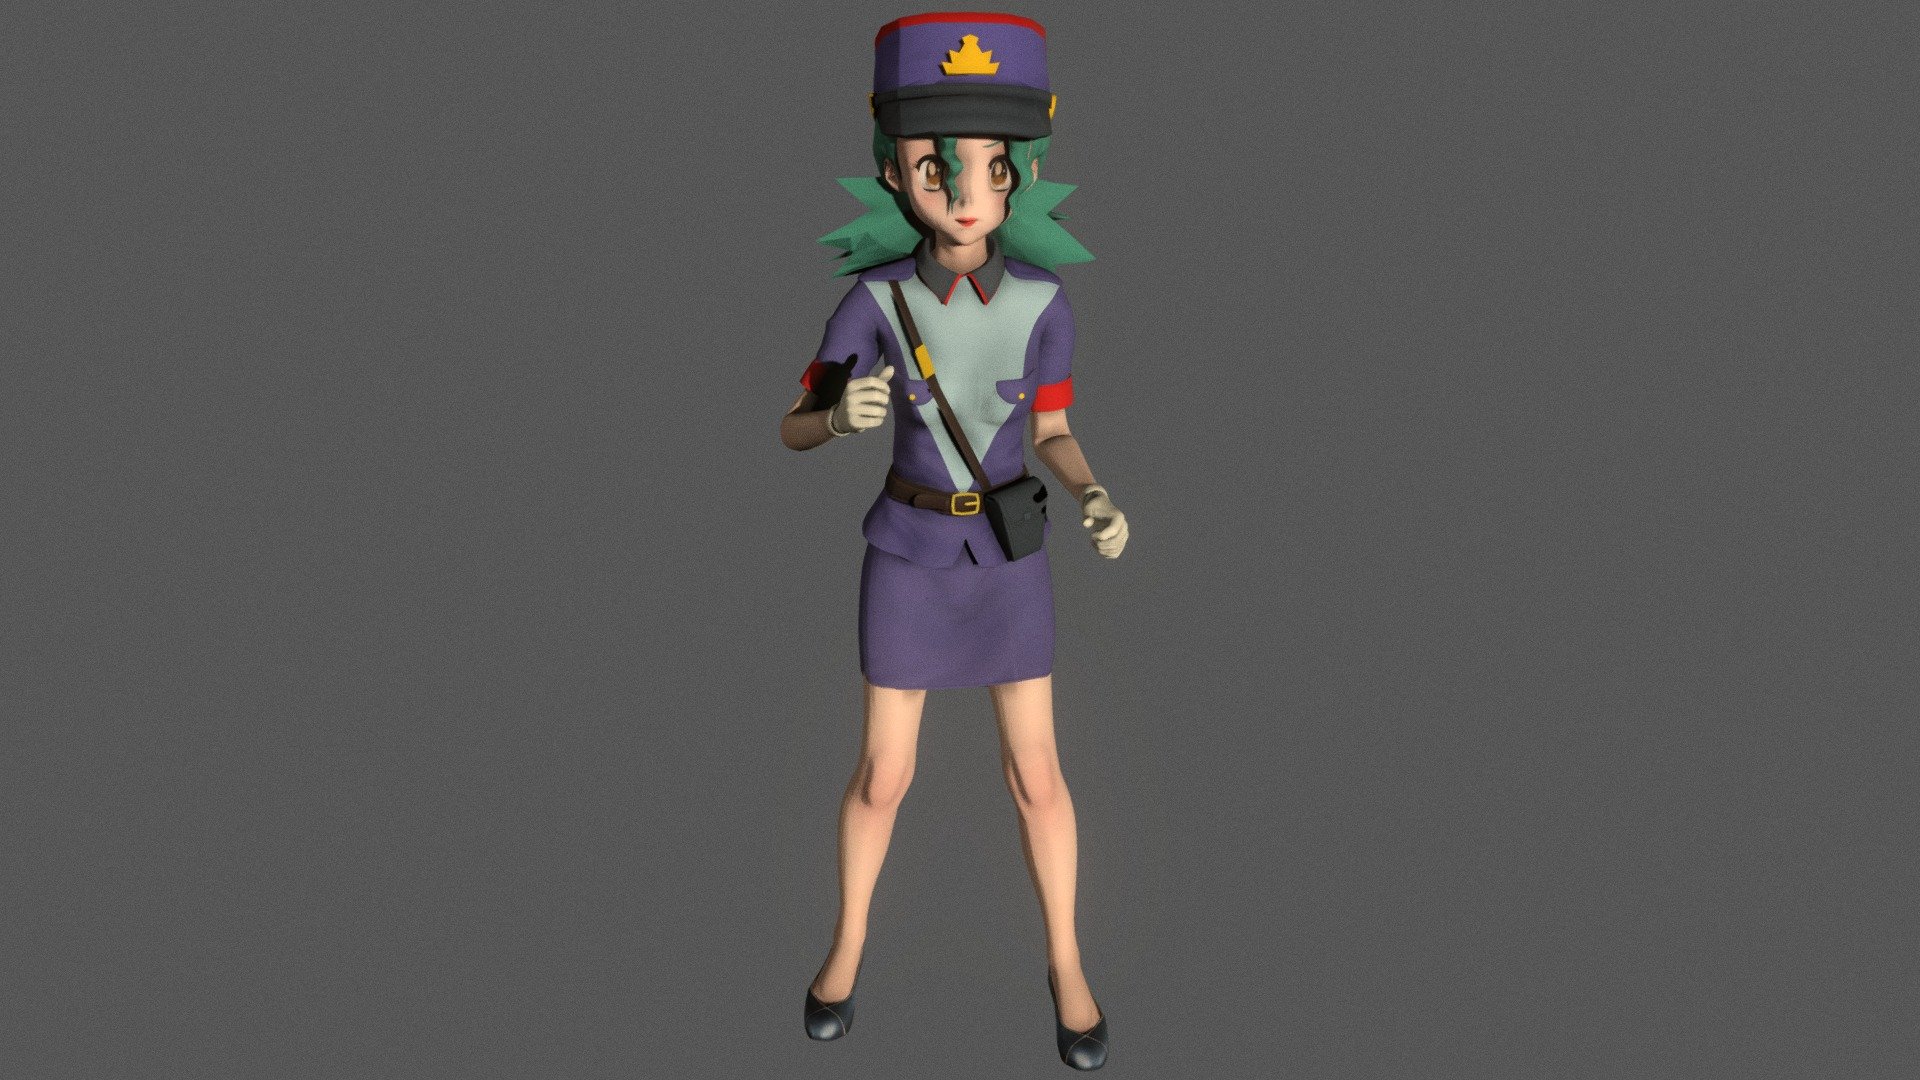 Posed model of anime girl Jenny (Pokemon).

This product include .FBX (ver. 7200) and .MAX (ver. 2010) files.

Rigged version: https://sketchfab.com/3d-models/t-pose-rigged-model-of-jenny-c1c39f834b3247d592c06a9132703a2a

I support convert this 3D model to various file formats: 3DS; AI; ASE; DAE; DWF; DWG; DXF; FLT; HTR; IGS; M3G; MQO; OBJ; SAT; STL; W3D; WRL; X.

You can buy all of my models in one pack to save cost: https://sketchfab.com/3d-models/all-of-my-anime-girls-c5a56156994e4193b9e8fa21a3b8360b

And I can make commission models.

If you have any questions, please leave a comment or contact me via my email 3d.eden.project@gmail.com 3d model